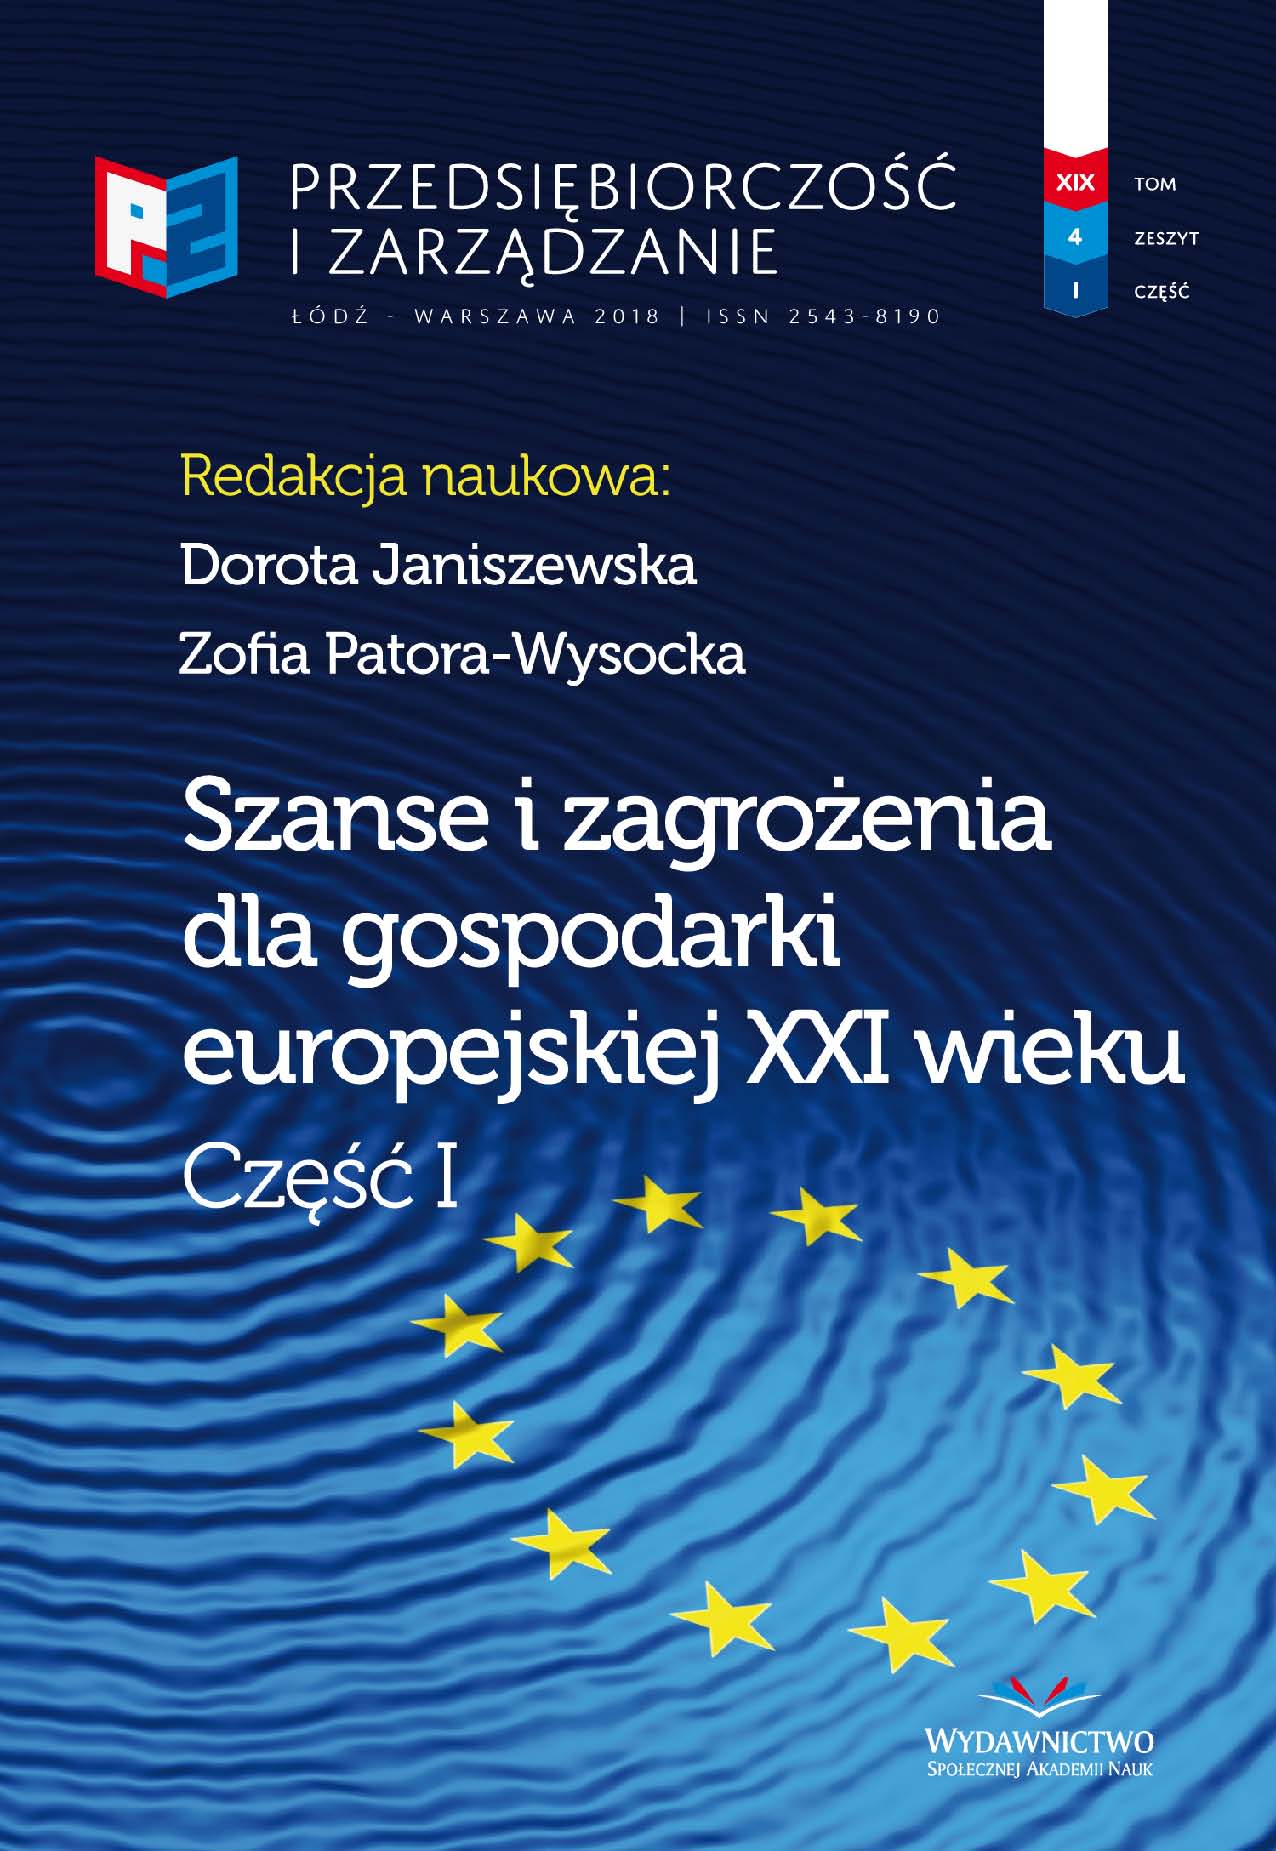 Activities within the Corporate Responsibility Society among Entrepreneurs from the SME Sector in the Malopolska Province Cover Image